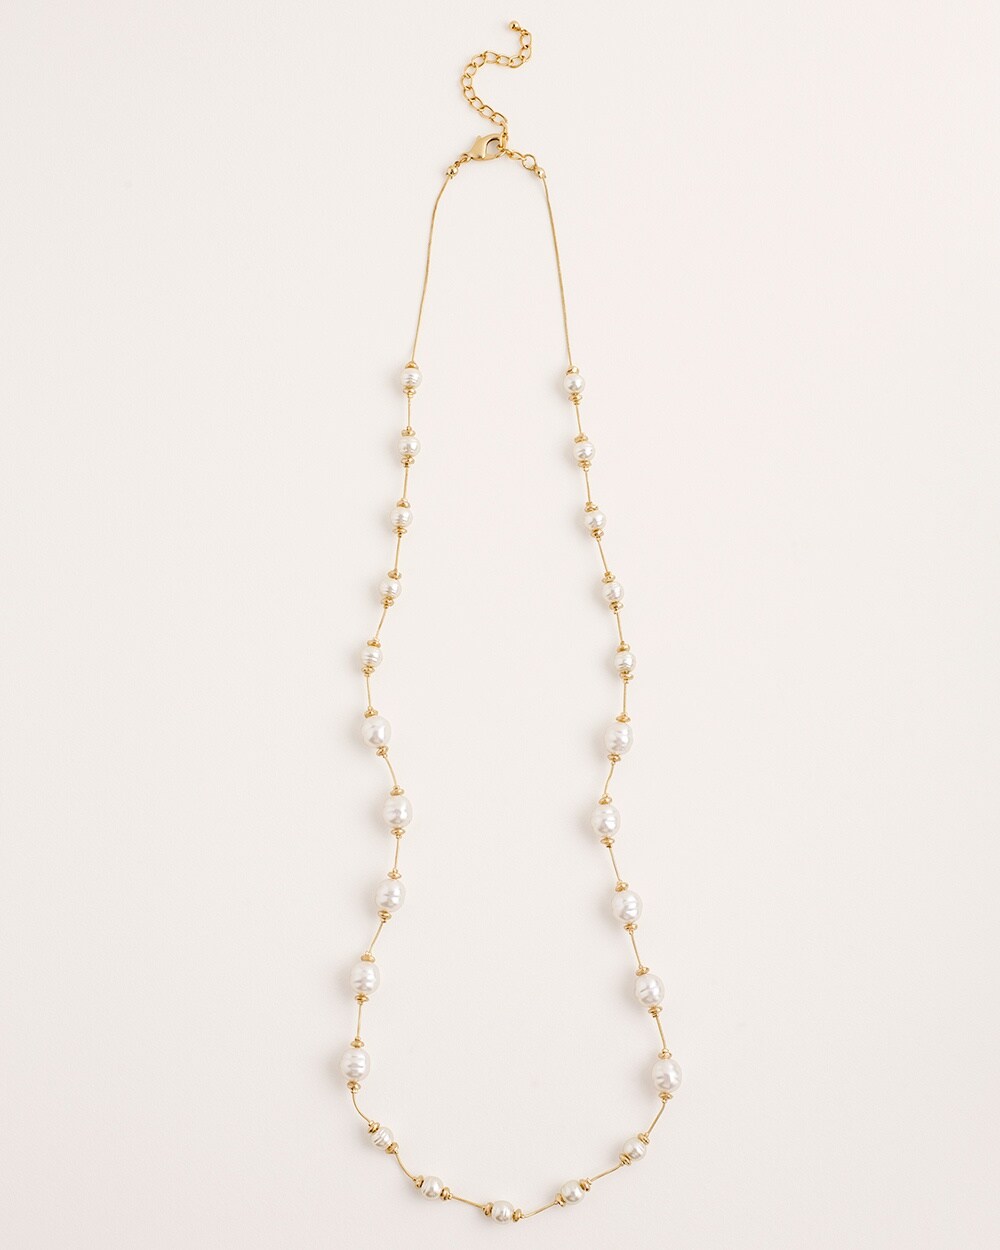 Single-Strand Goldtone Faux-Pearl Necklace